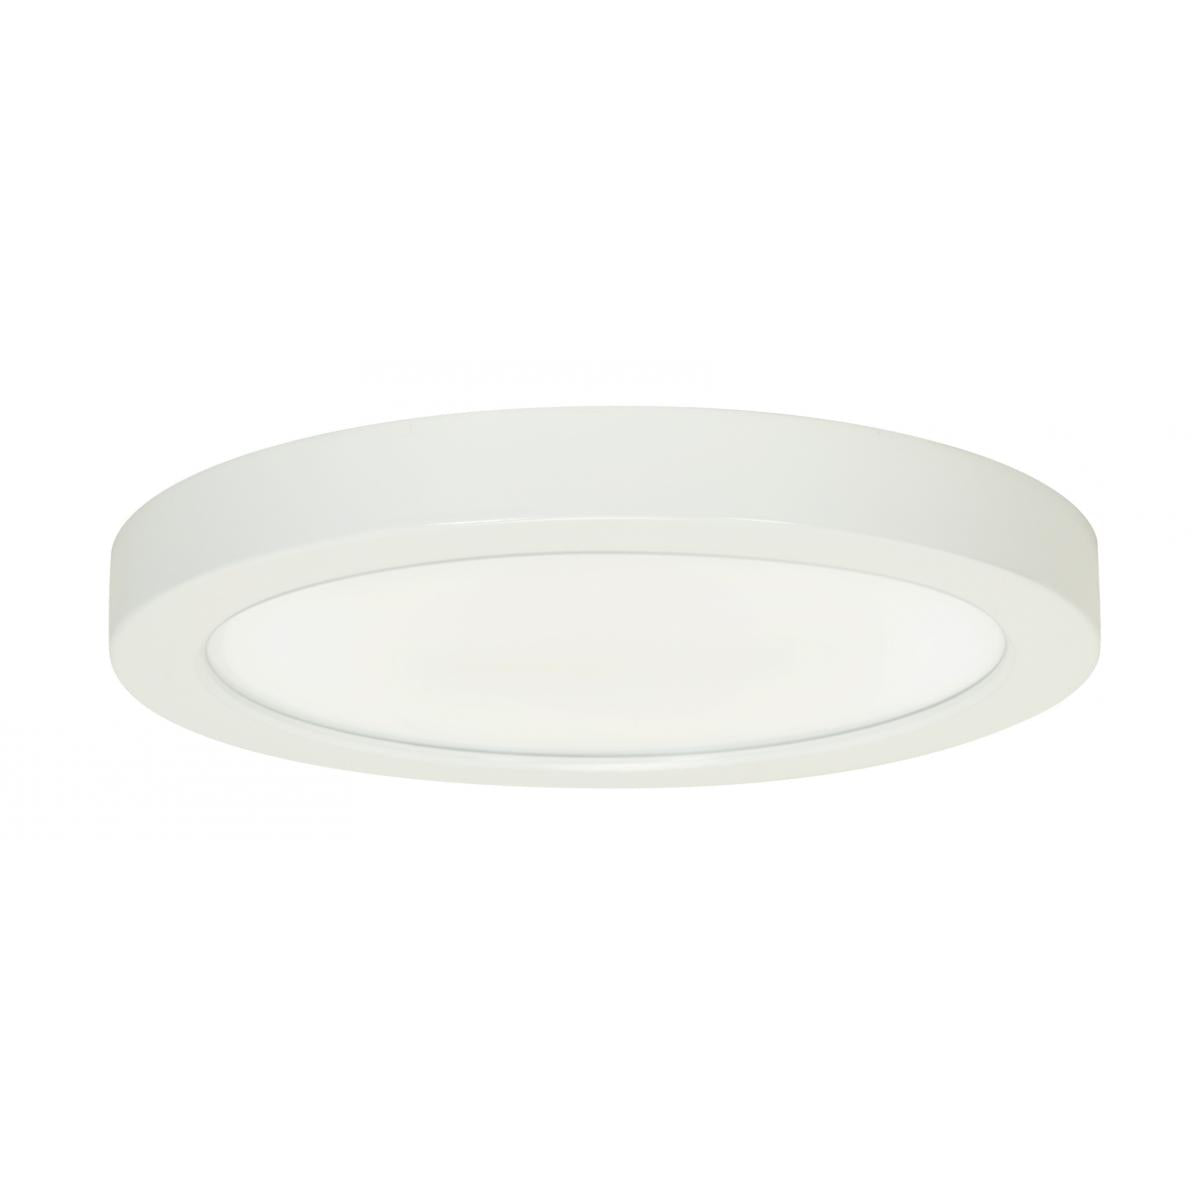 Replacement for Satco S29690 18.5 watt 9" Flush Mount LED Fixture 4000K Round Shape White Finish 120 volts - NOW 62/1720